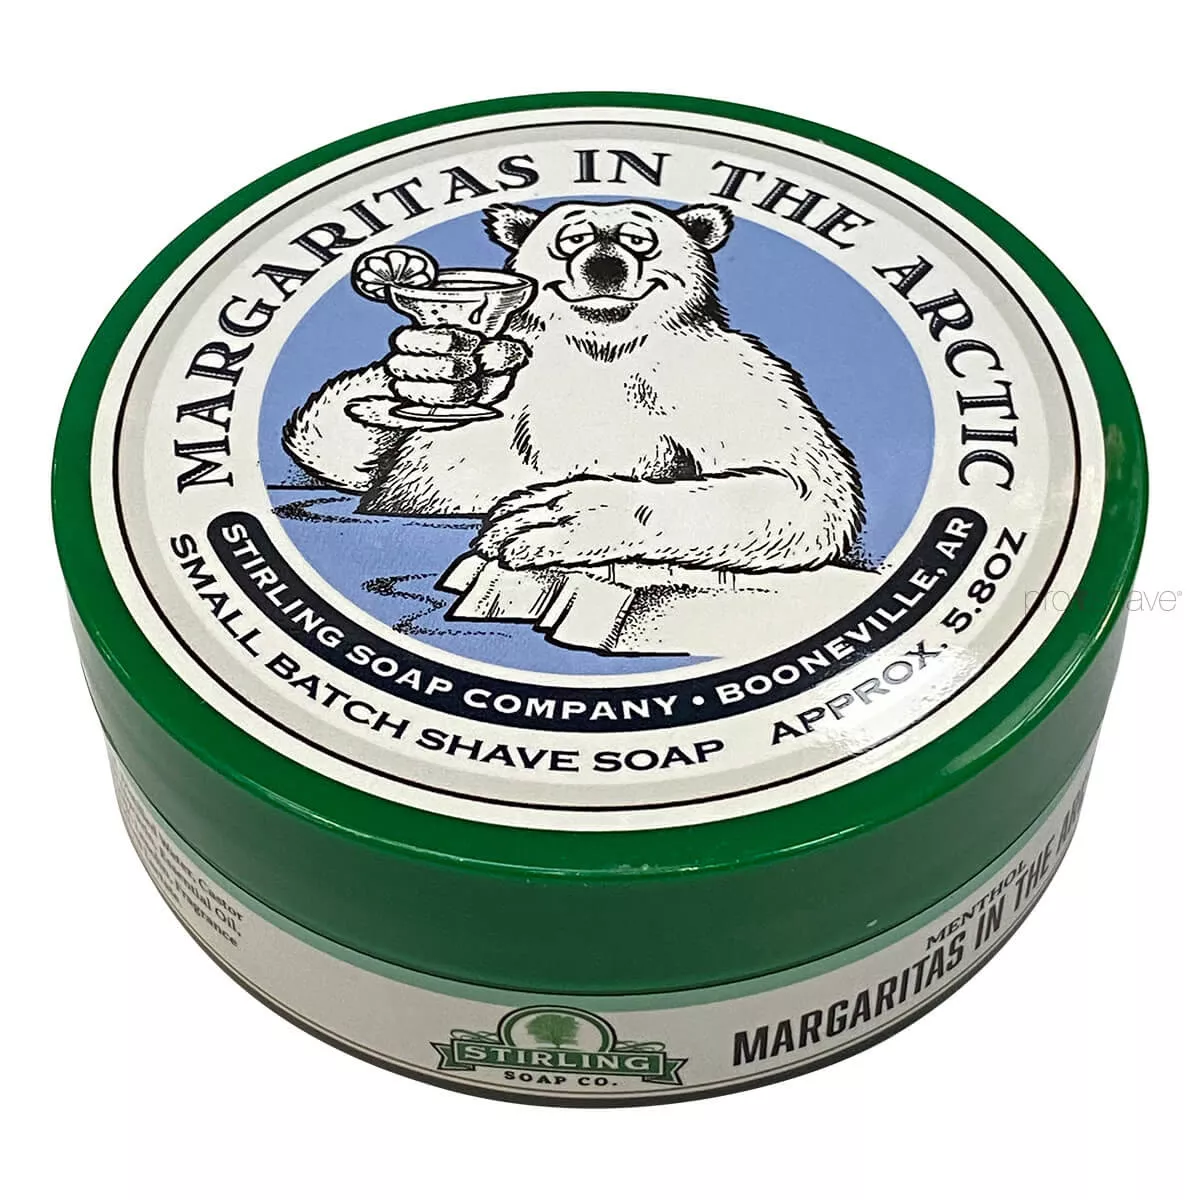 #2 - Stirling Soap Co. Barbersæbe, Margaritas in the Arctic, 170 ml.